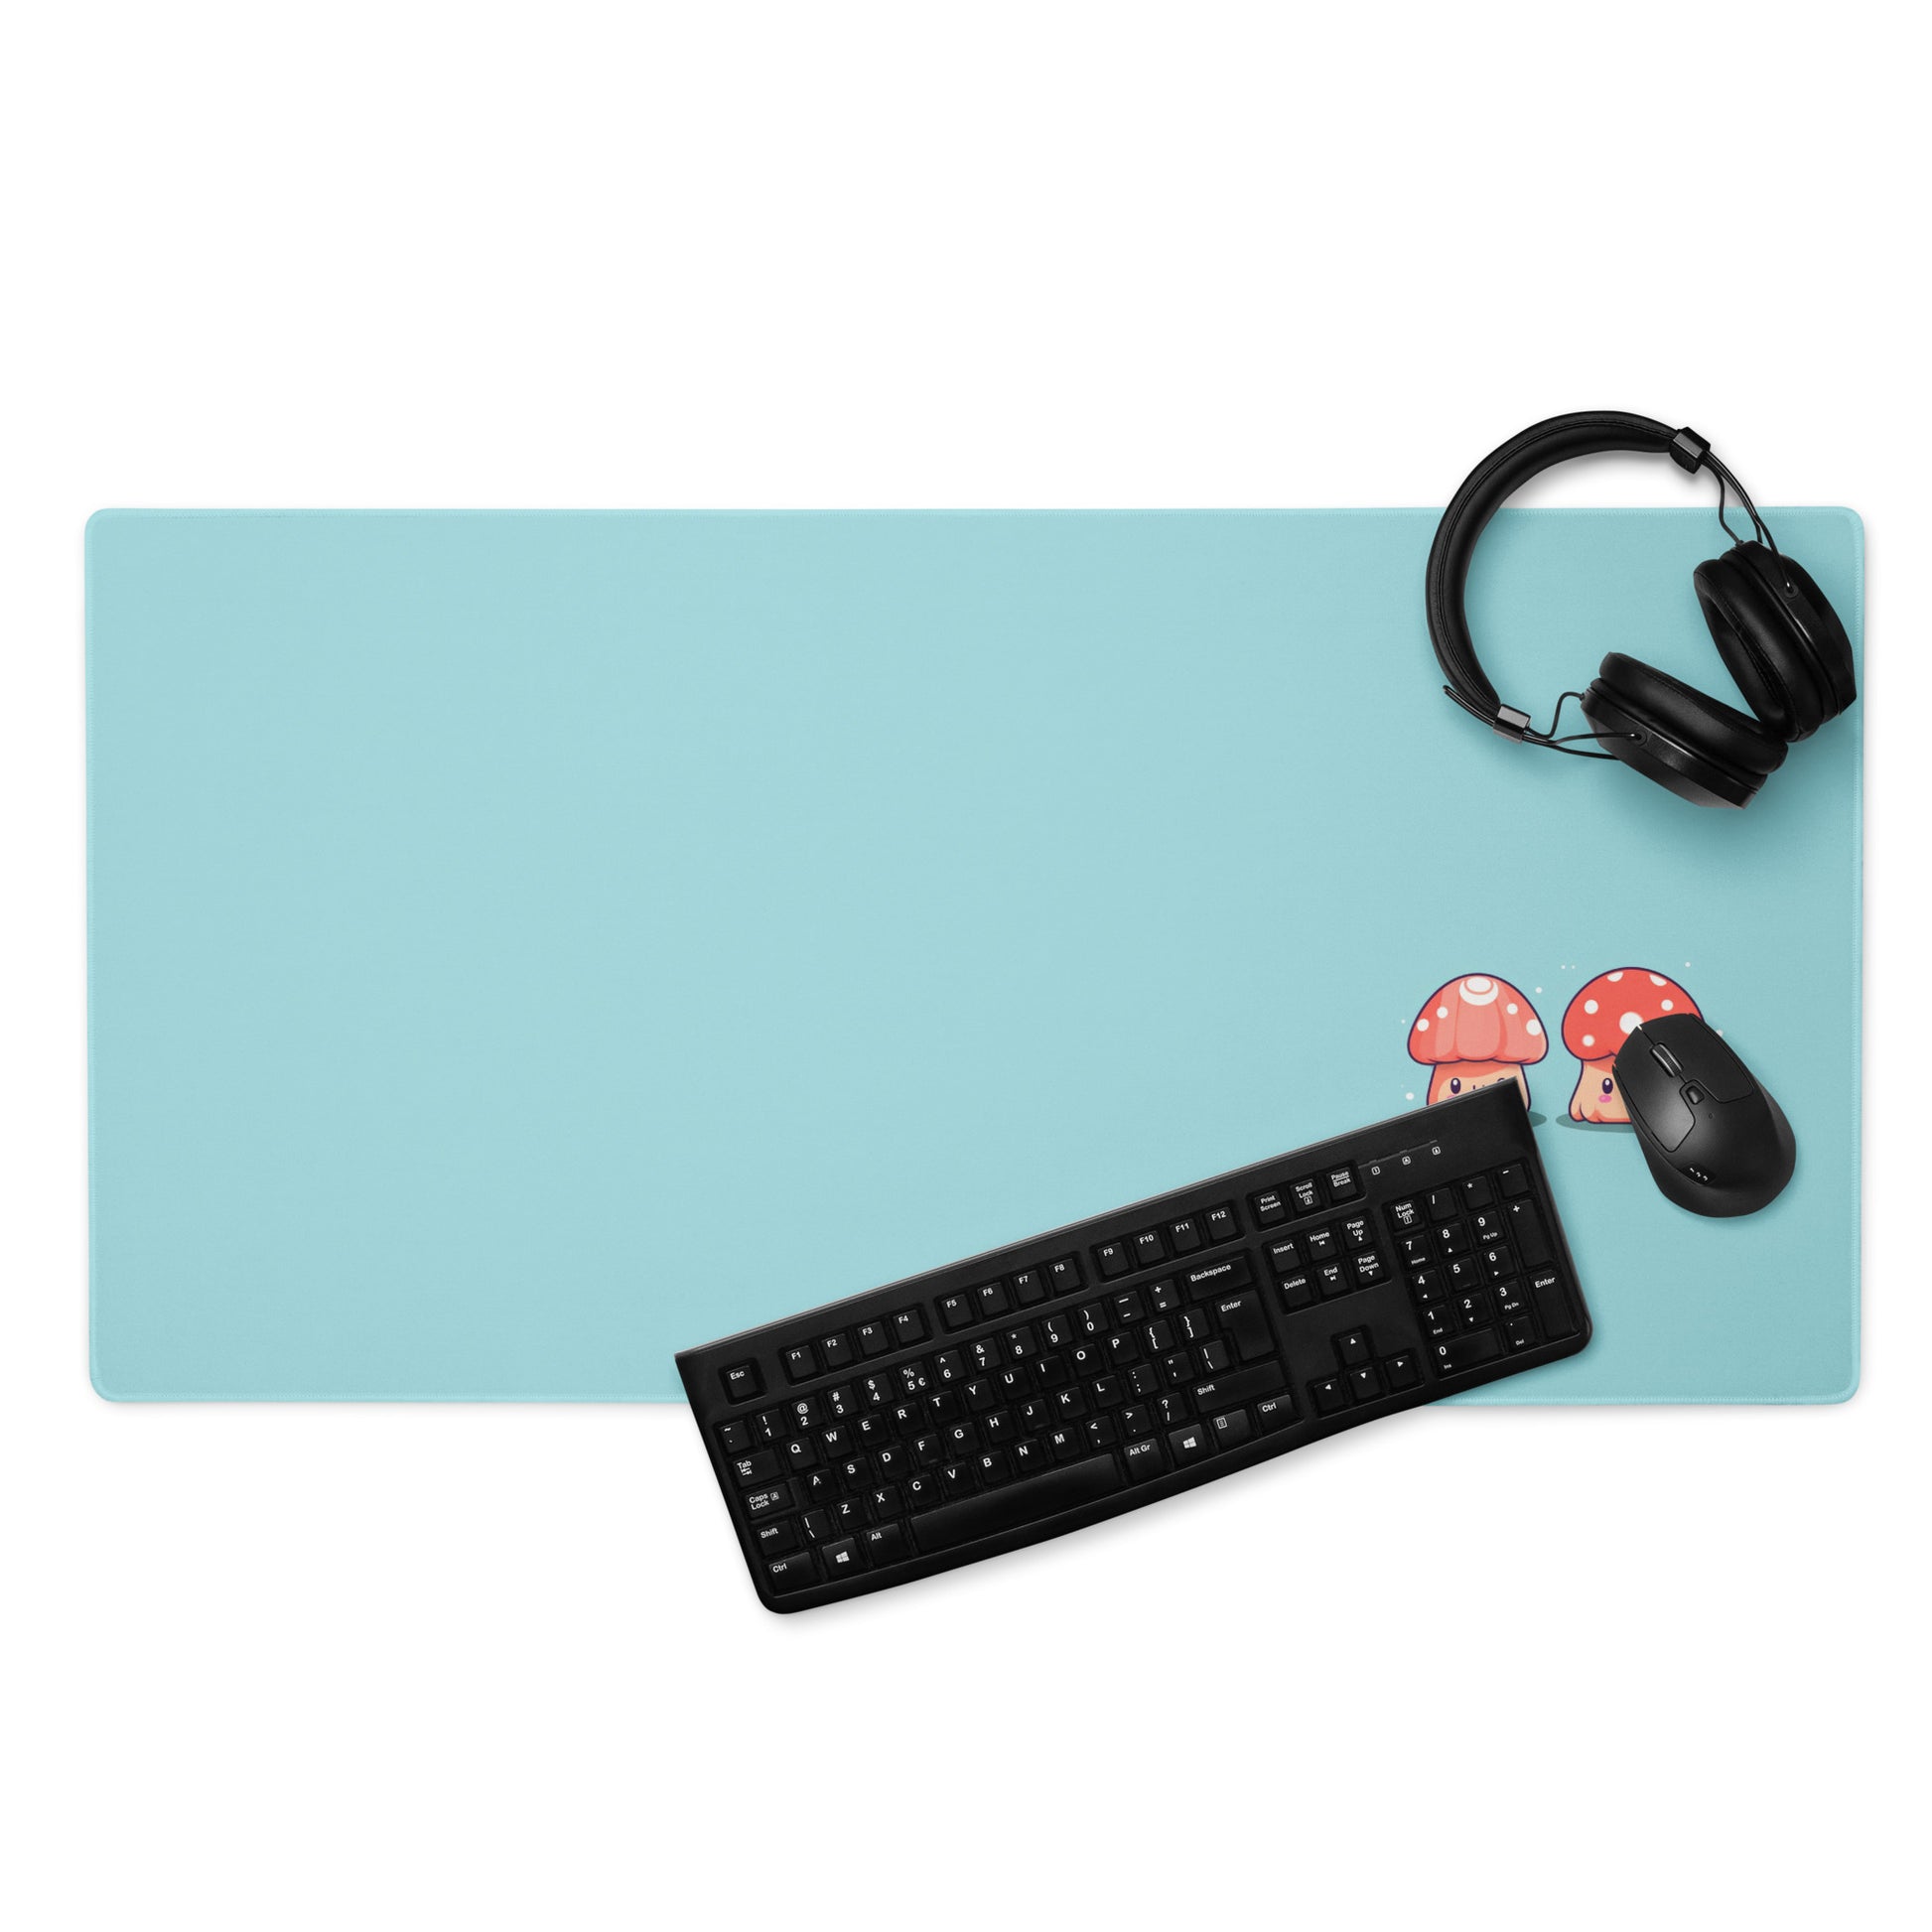 A gaming desk pad with two kawaii mushrooms on a blue background. A keyboard, mouse, and headphones sit on top of it.